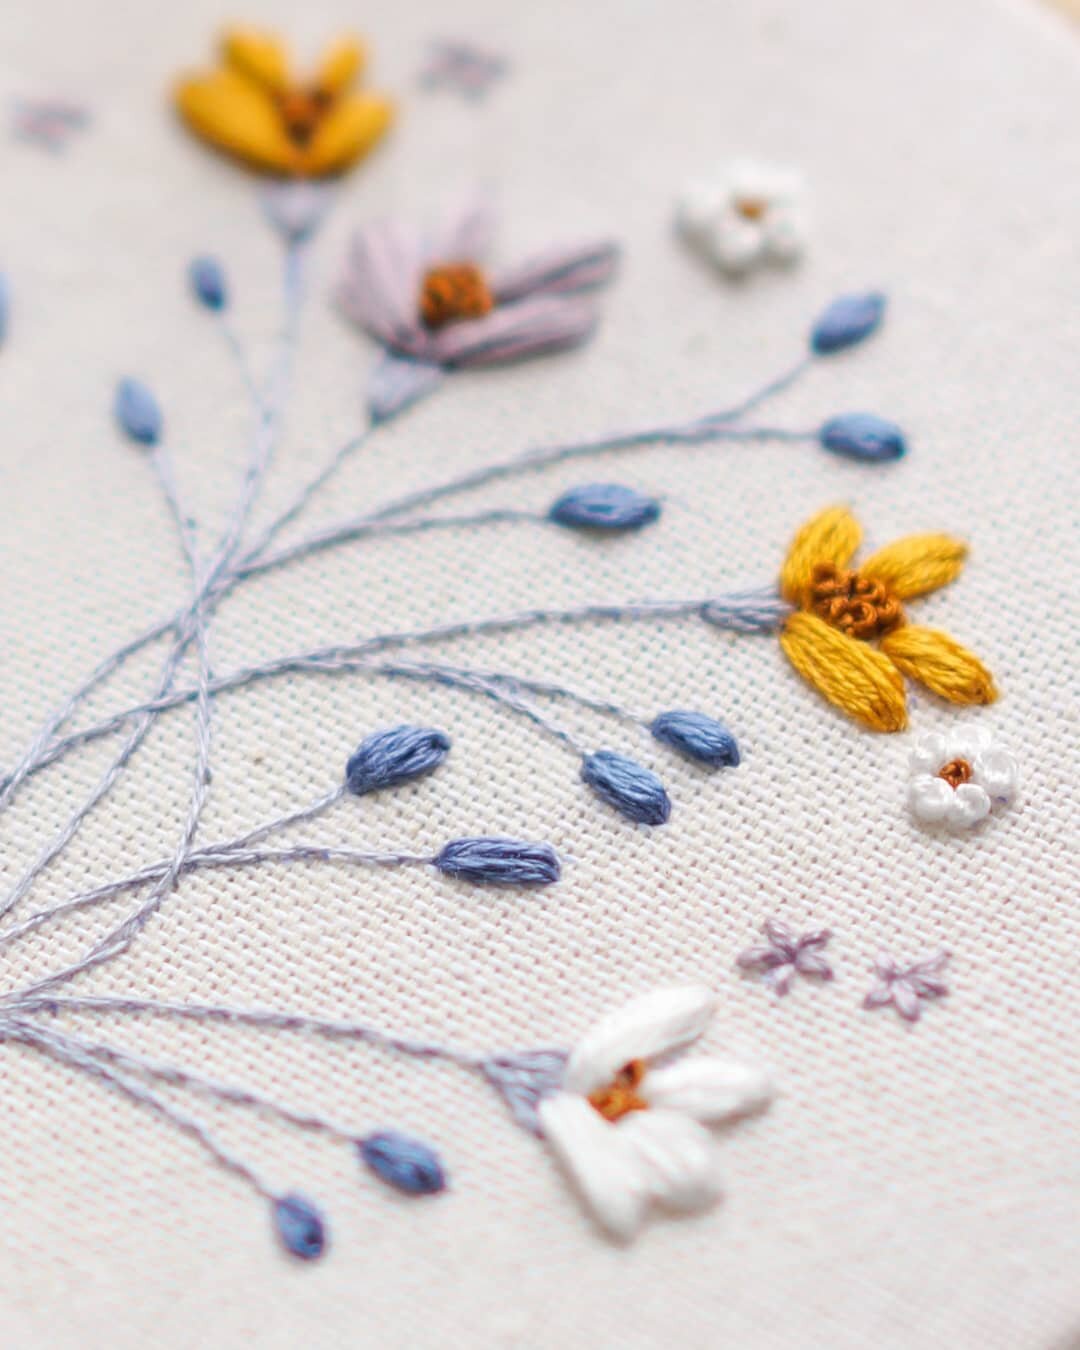 Snow Crocus PDF pattern available on www.sometimeinspring.com
.
.
.
.
#handembroidery #bordados #hoopart #britishstitchers #diyembroidery #embroideryart #slowcraft #handmadeembroidery #embroideredtreasures #crafternoon #embroiderykit #floralembroider